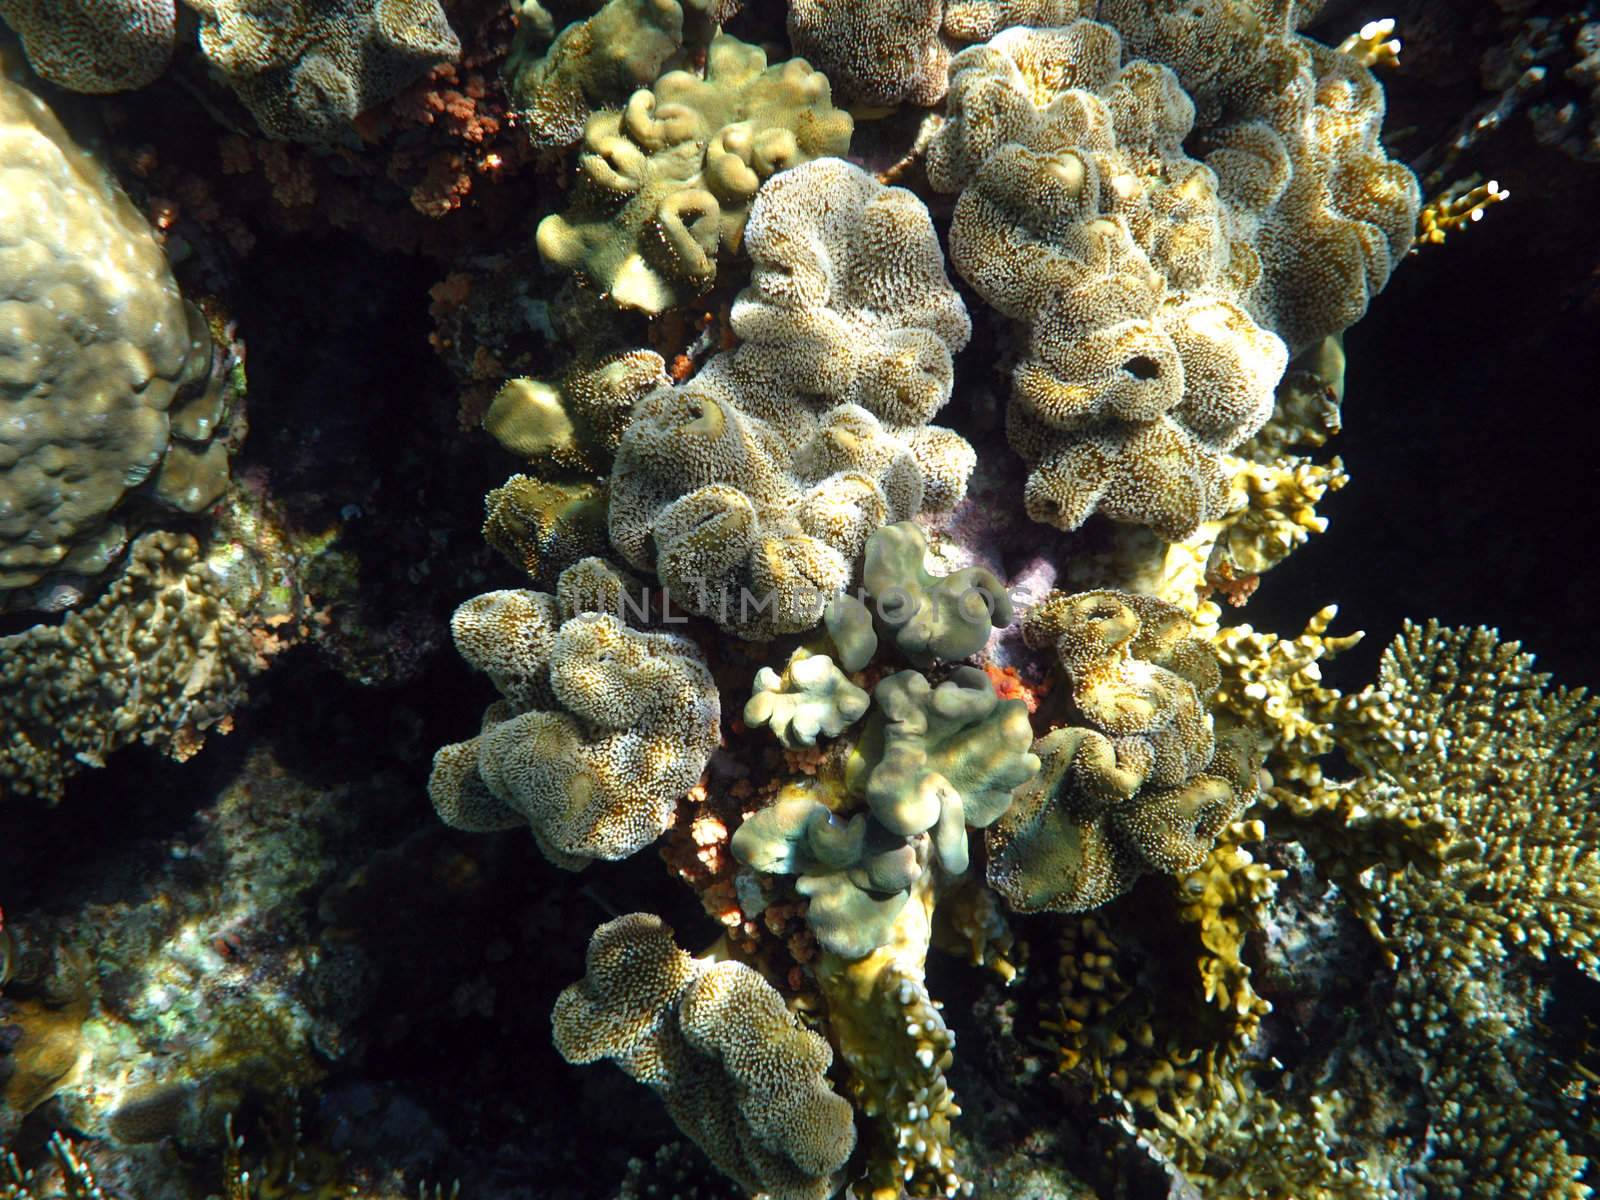 Tropical coral reef in Red sea